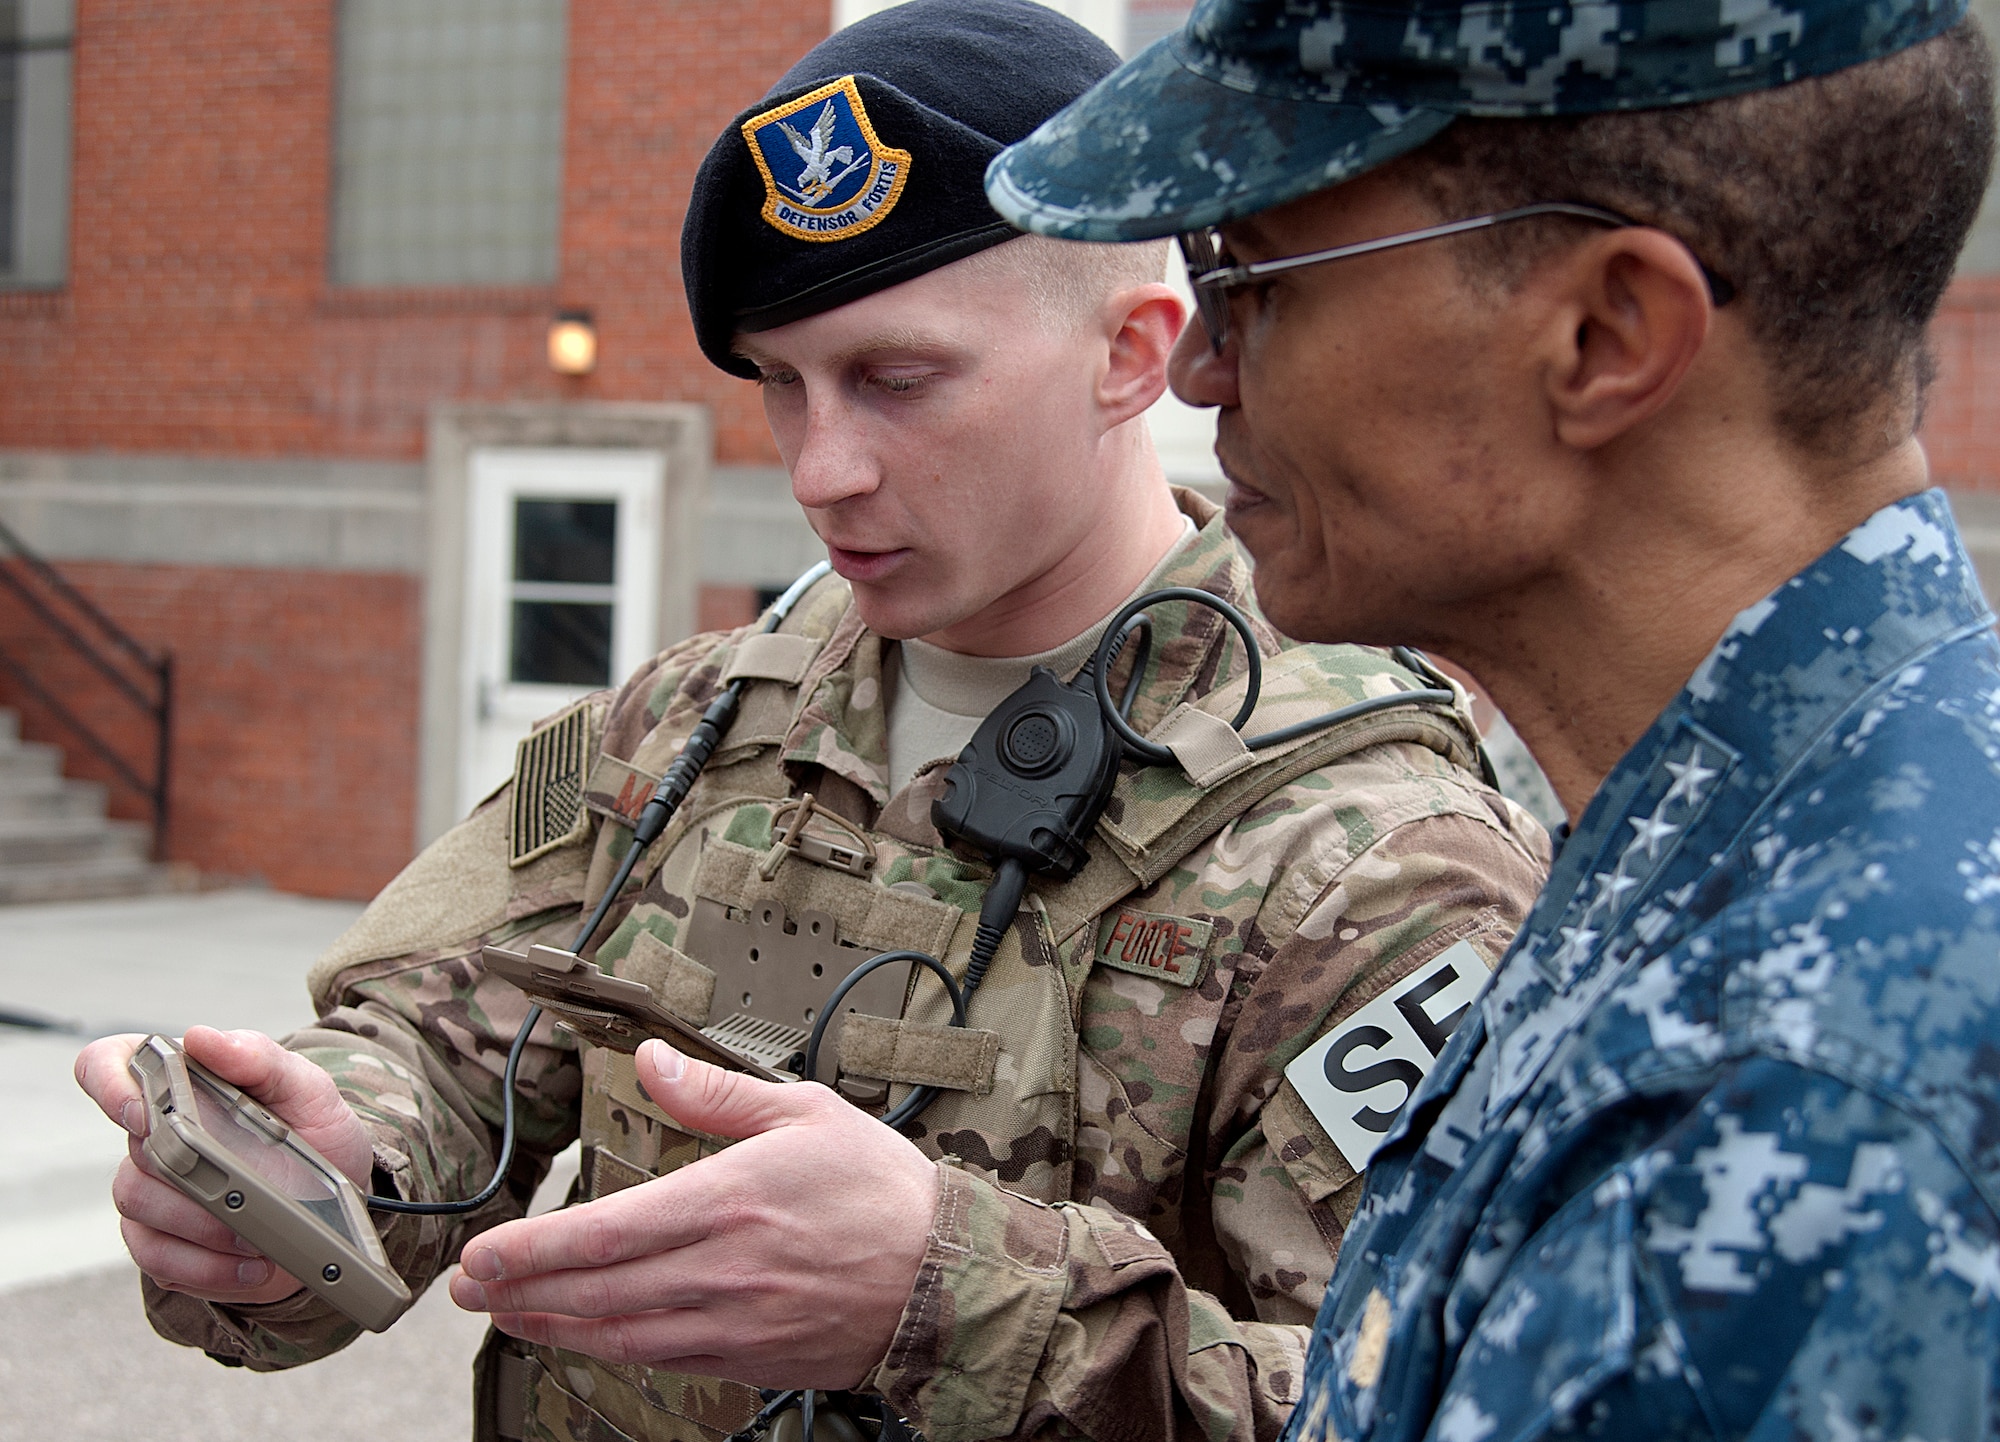 U.S. Air Force Airman Shane Michalik, 790th Missile Security Forces Squadron convoy response force member, shows  U.S. Navy Adm. Cecil D. Haney, U.S. Strategic Command commander, communication gear used in the field during his visit by Haney to F.E. Warren Air Force Base, Wyo., April 28, 2015. Haney traveled to F.E. Warren to see firsthand the men and women performing the ICBM mission 24/7, 365, and to chair the Intercontinental Ballistic Missile Stakeholders meeting, one of several such meetings that will be held this year. USSTRATCOM is one of nine DoD unified combatant commands and is charged with strategic deterrence; space operations; cyberspace operations; joint electronic warfare; global strike; missile defense; intelligence, surveillance and reconnaissance; combating weapons of mass destruction; and analysis and targeting. (U.S. Air Force photo by Airman 1st Class Brandon Valle)